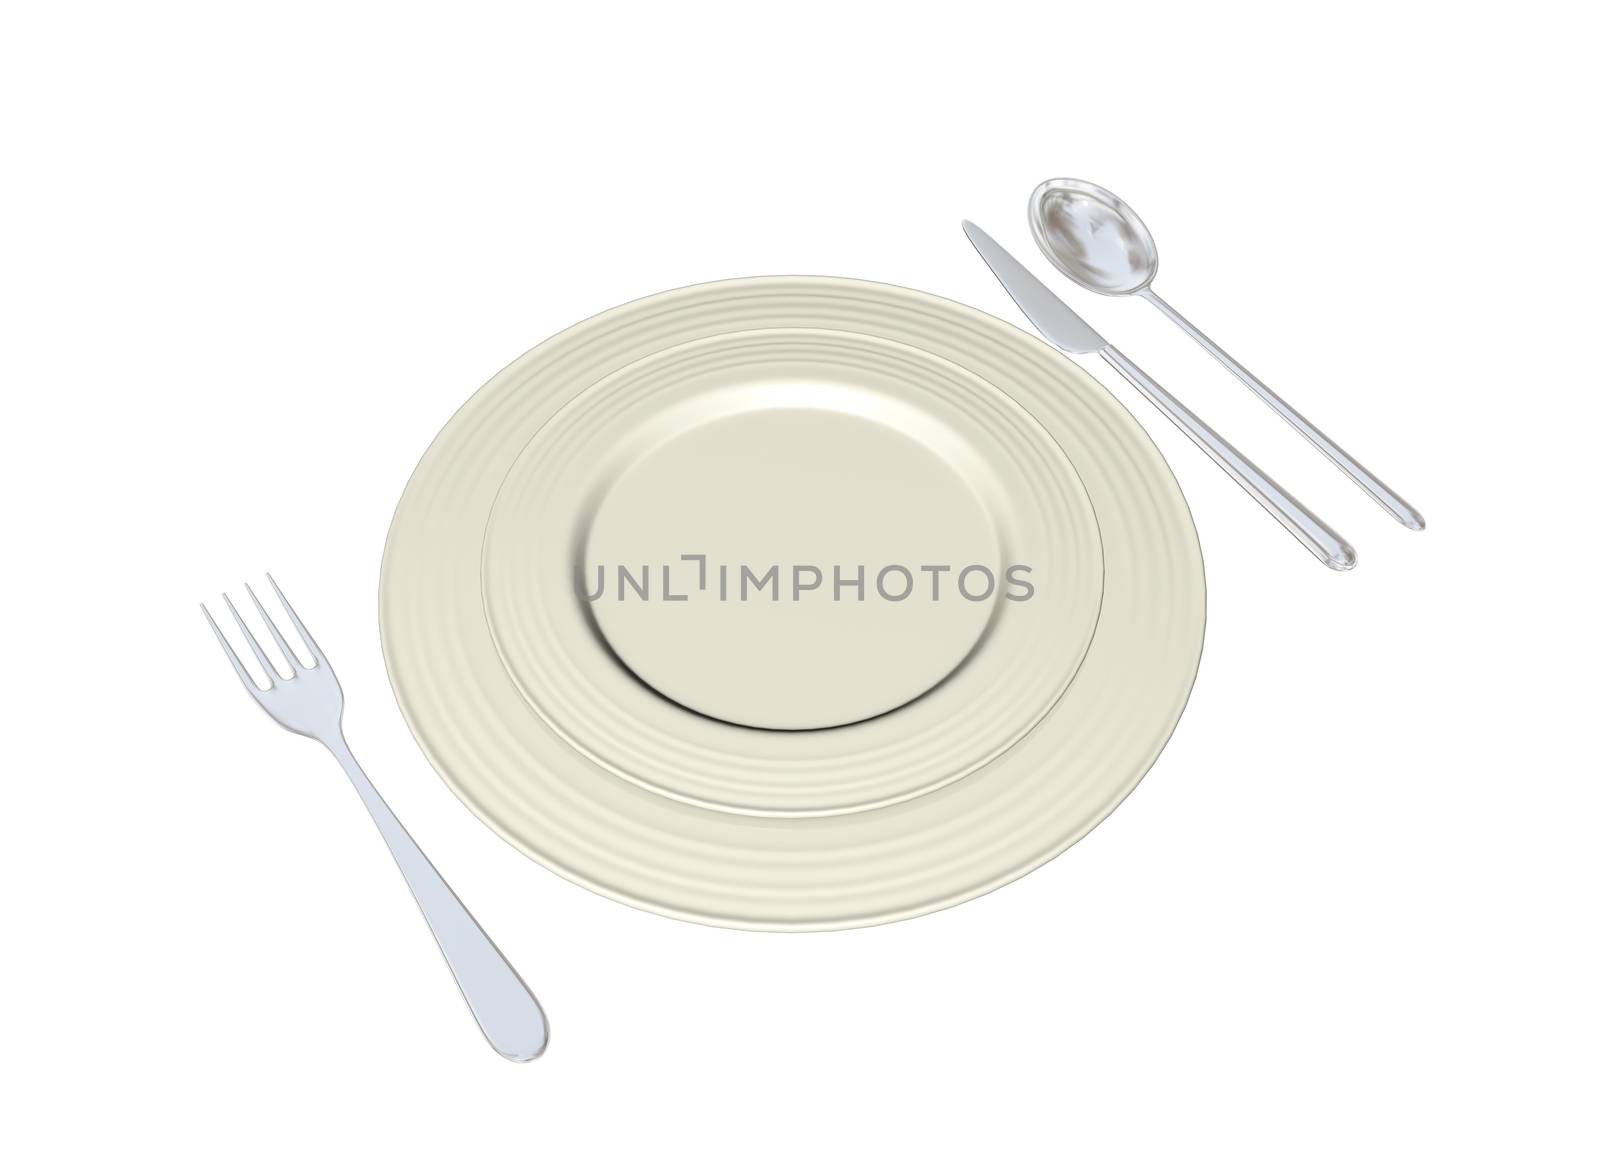 Metal plates with stainless steel spoon fork and knife, 3D illustration, isolated against a white background